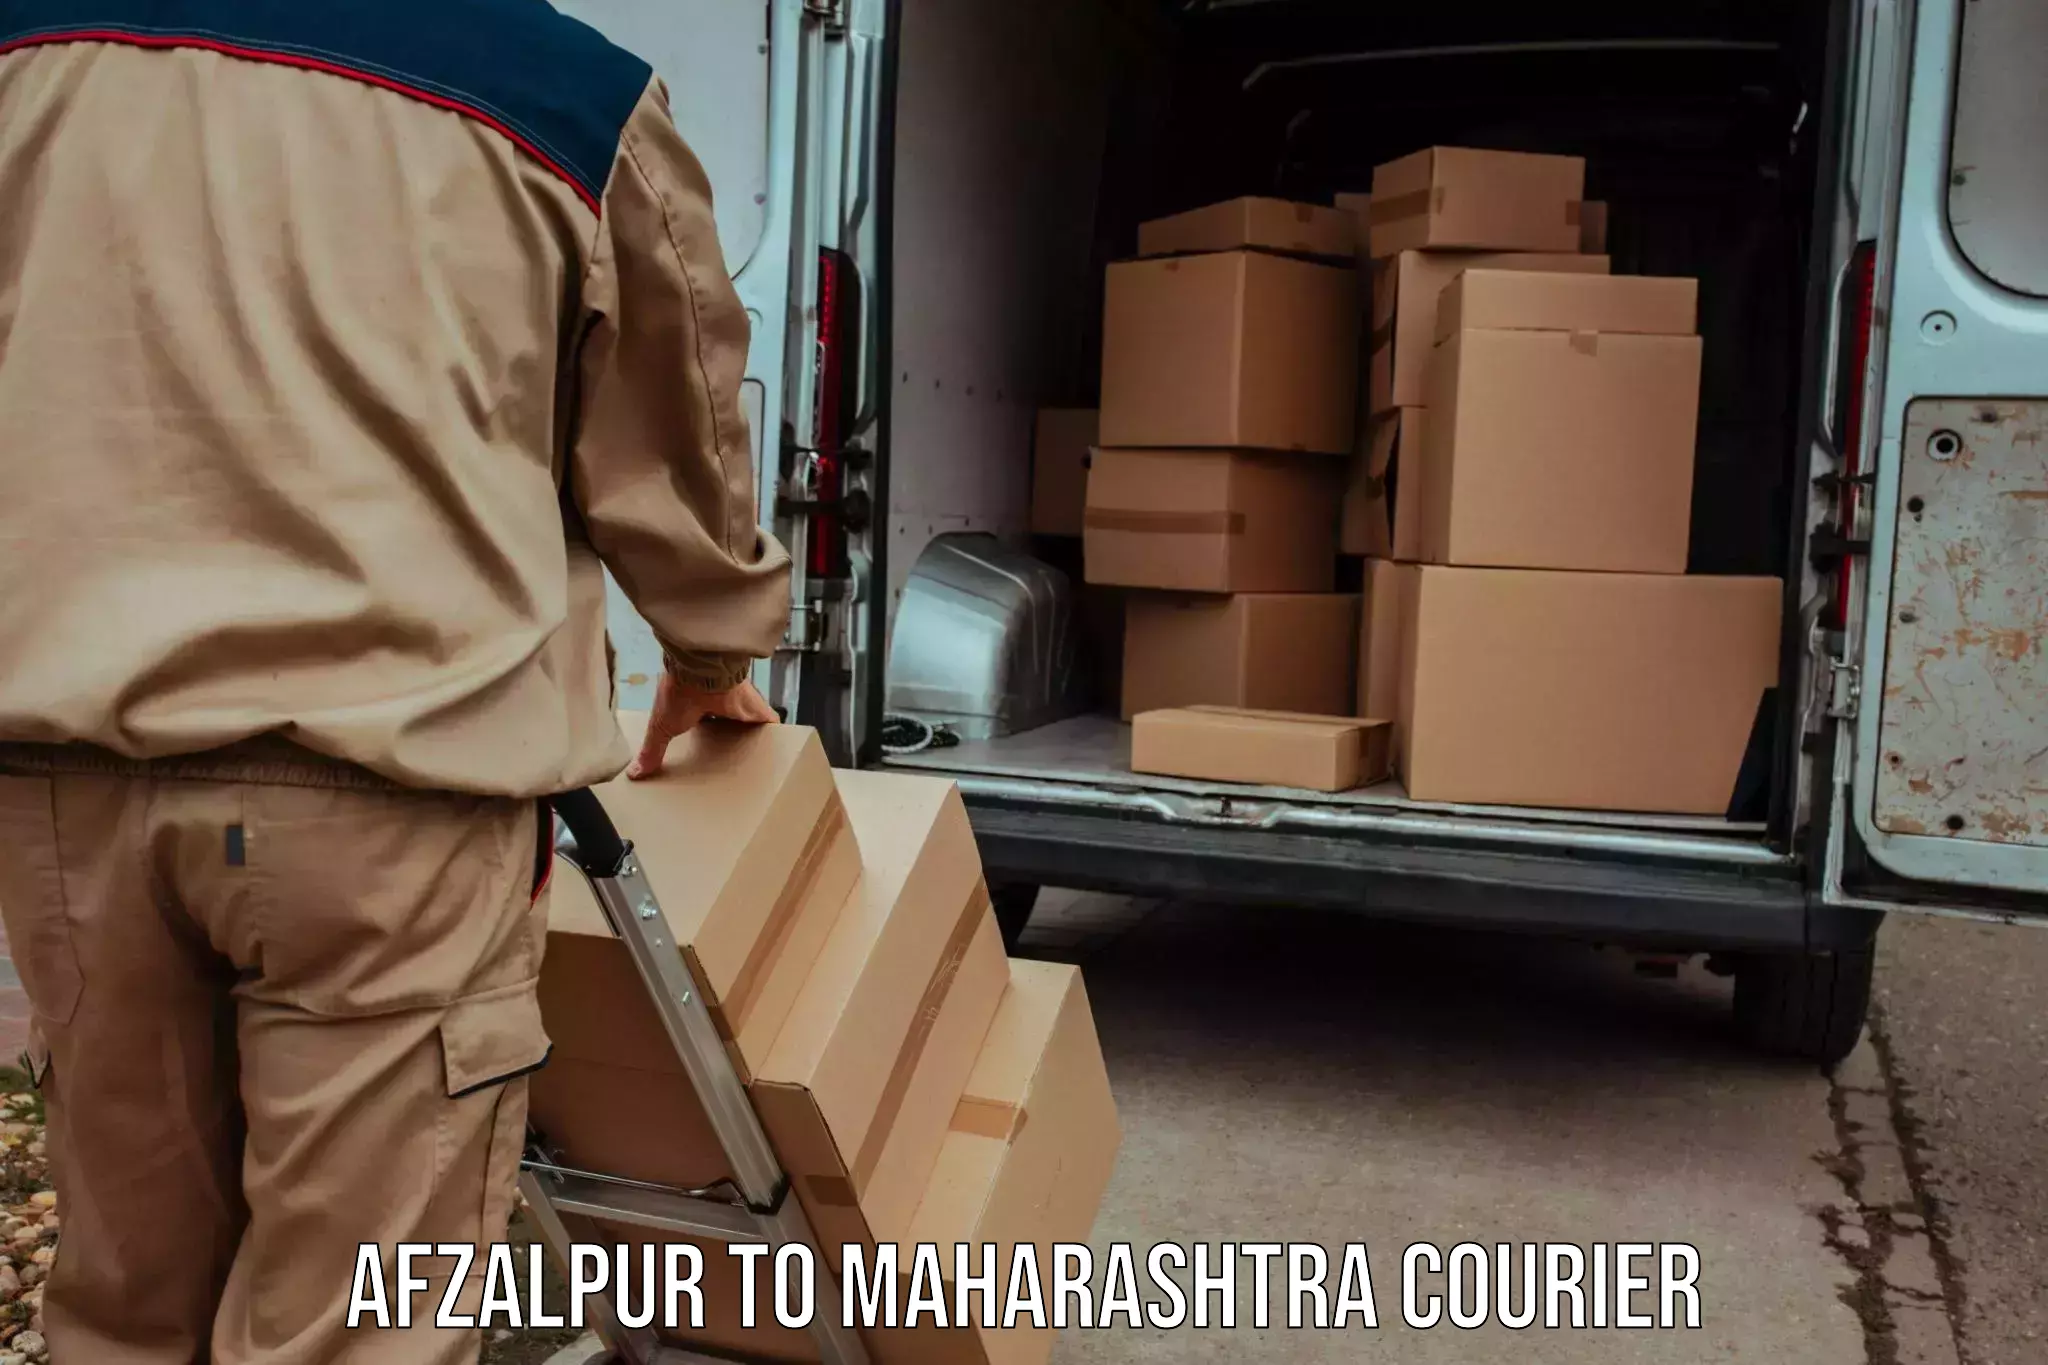 Express package services Afzalpur to Latur